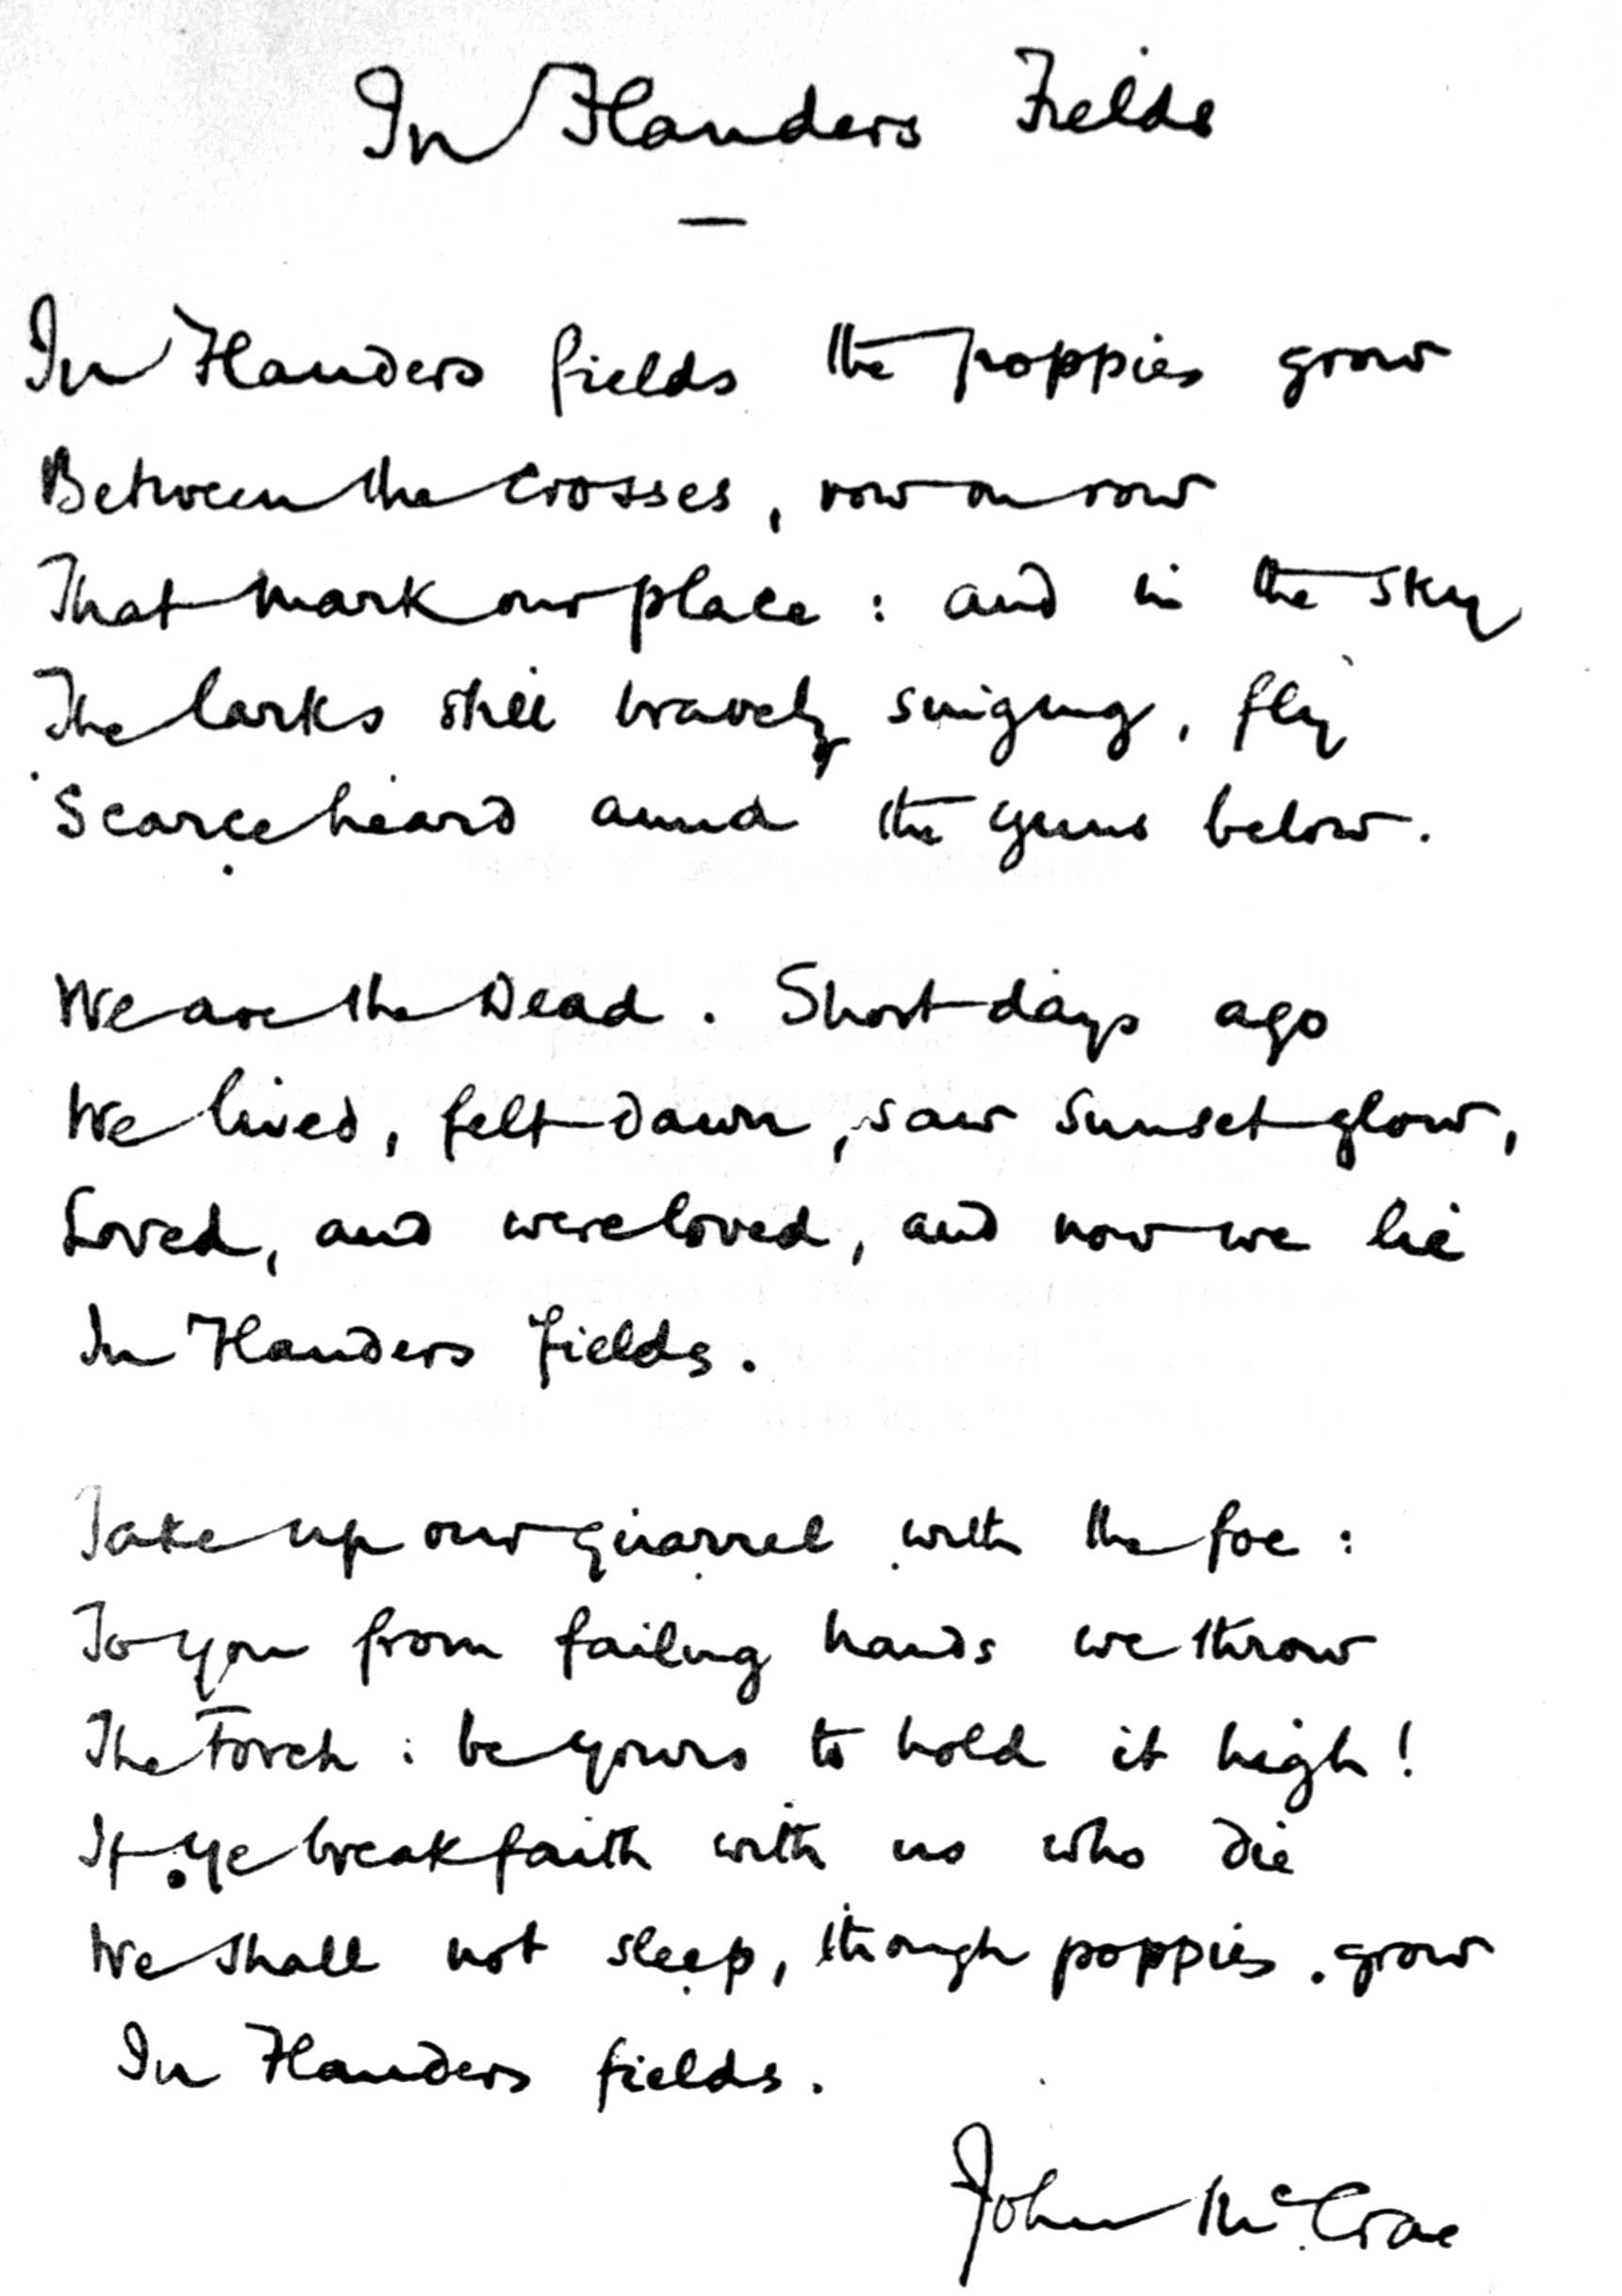 Rotations Practice Worksheet together with File In Flanders Fields and Other Poems Handwritten